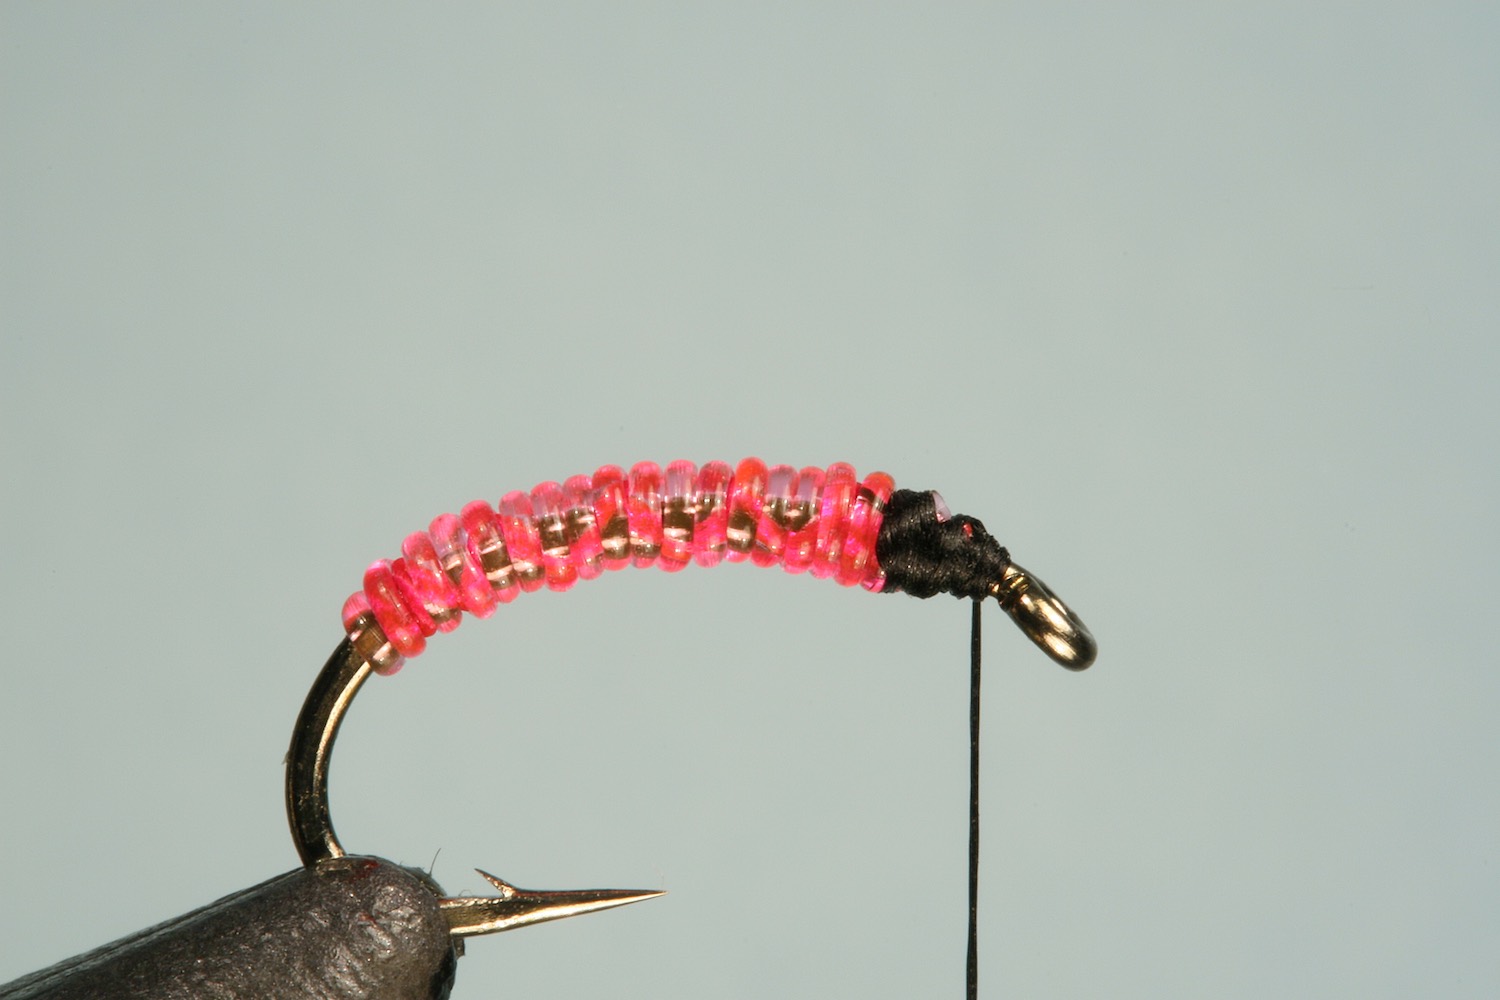 Step 2 of tying sequence for jelly caddis fly pattern